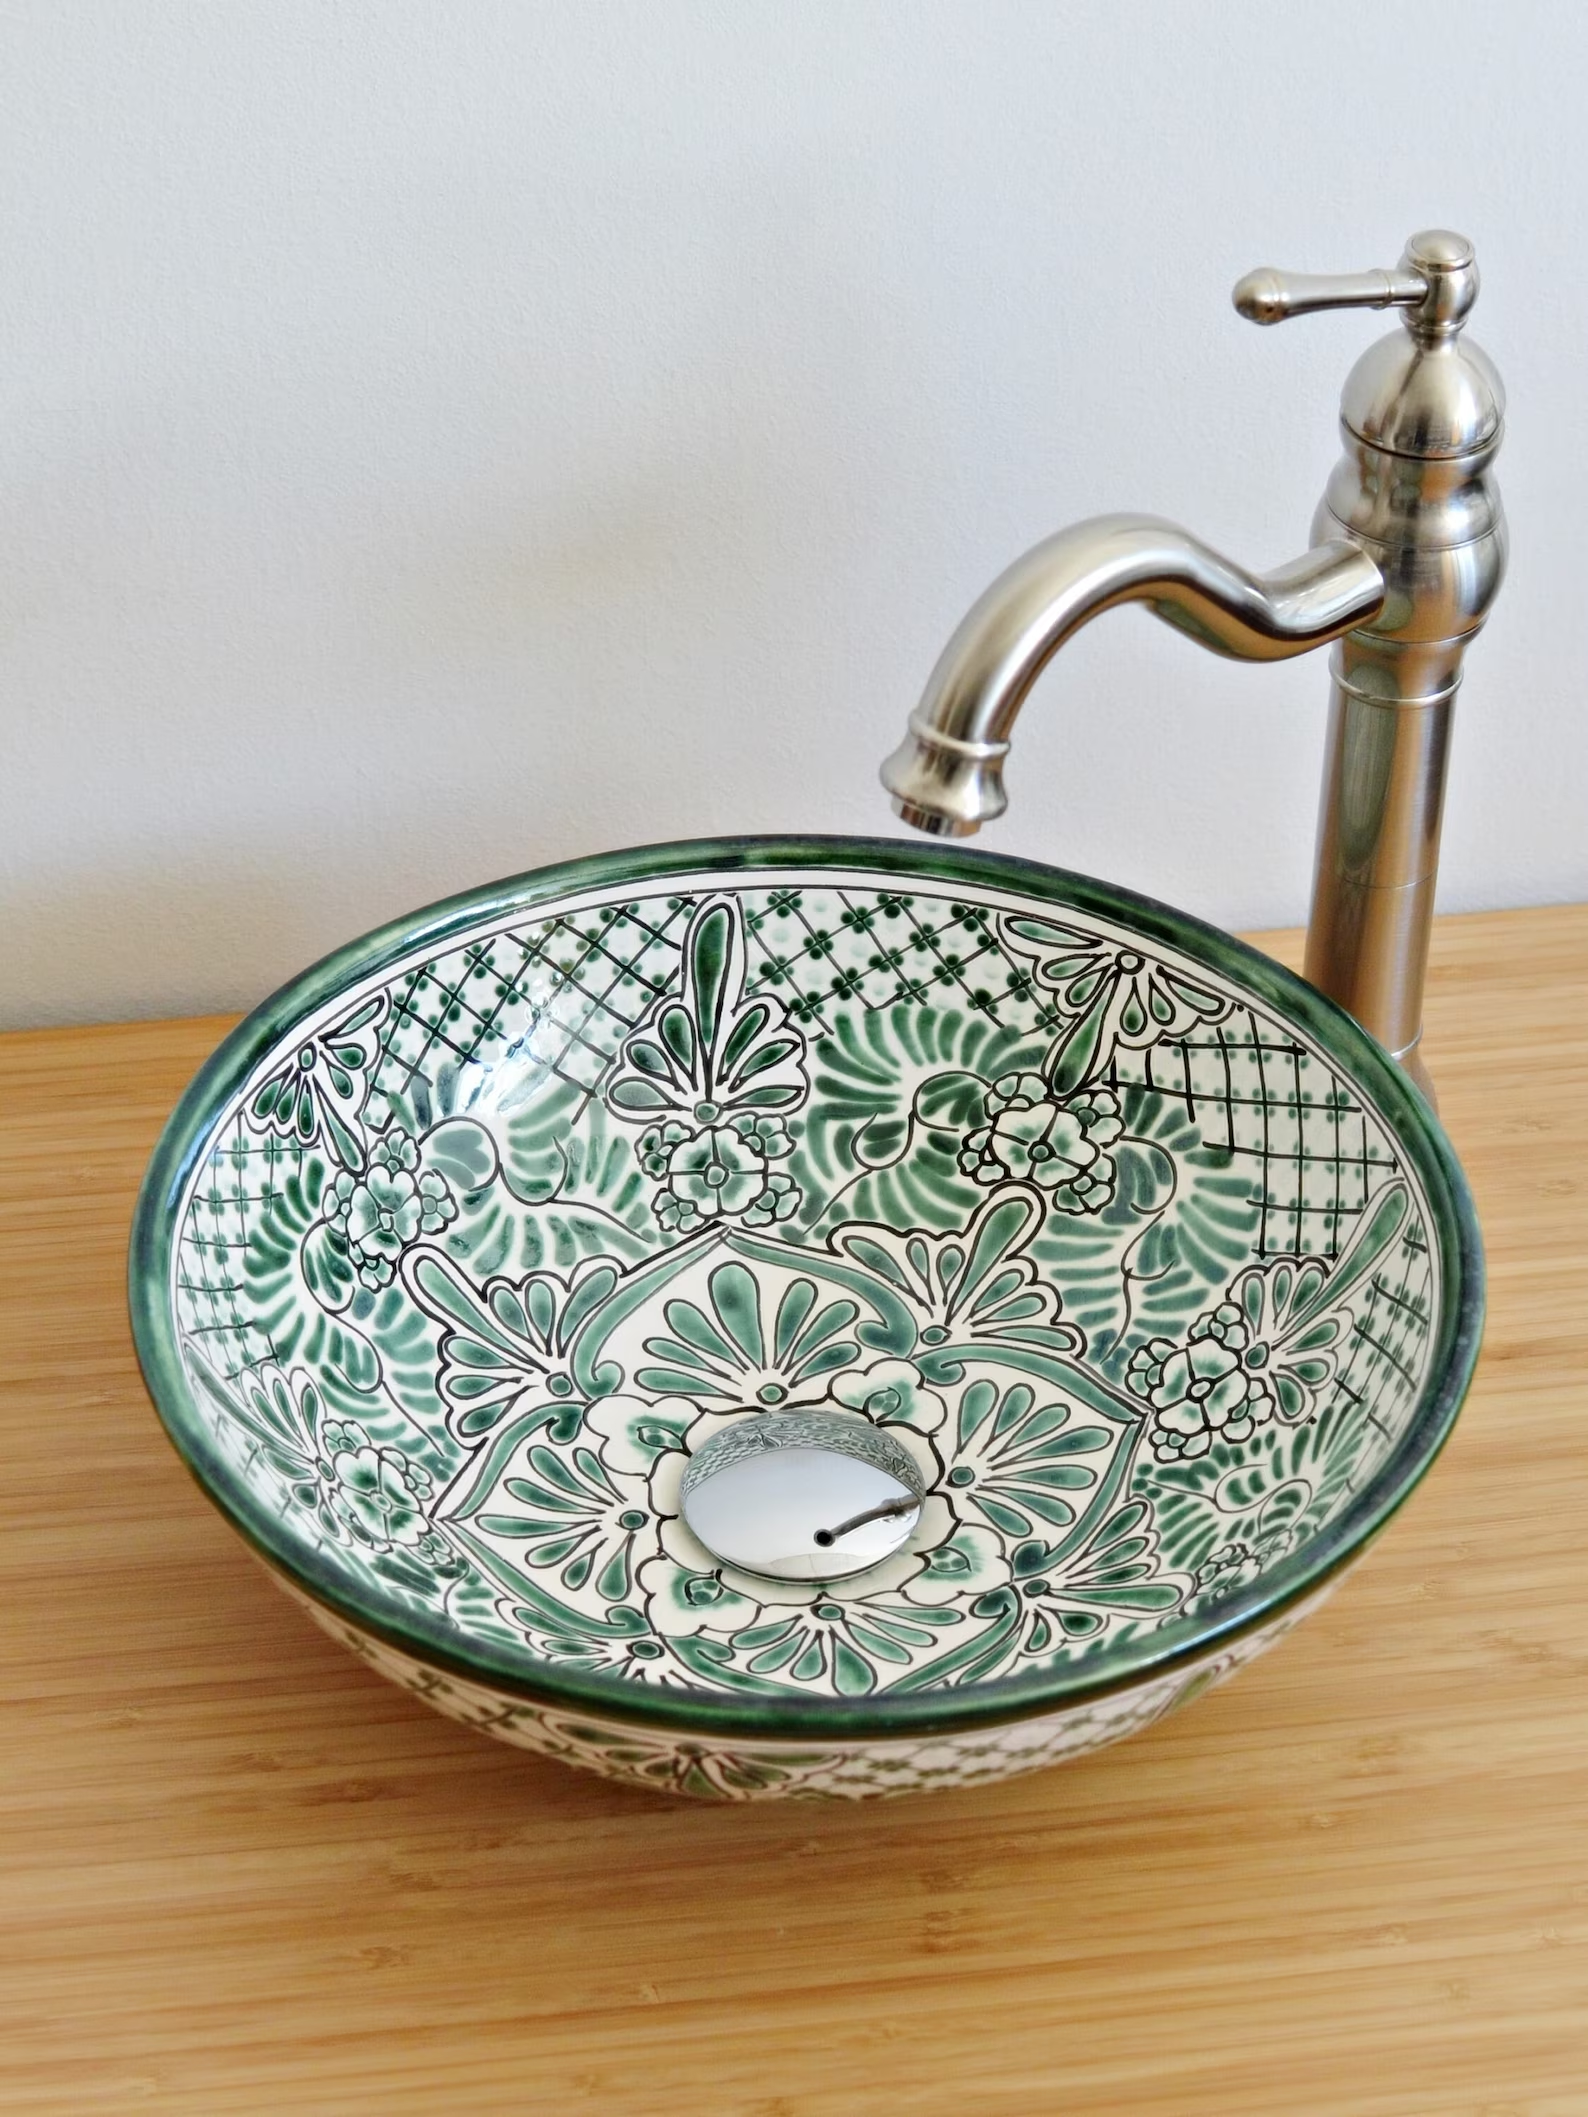 IMPERIAL - Small mexican washbasin round sink, talavera ceramic handpainted in Mexico for Bathroom or guest bathroom in small size.png